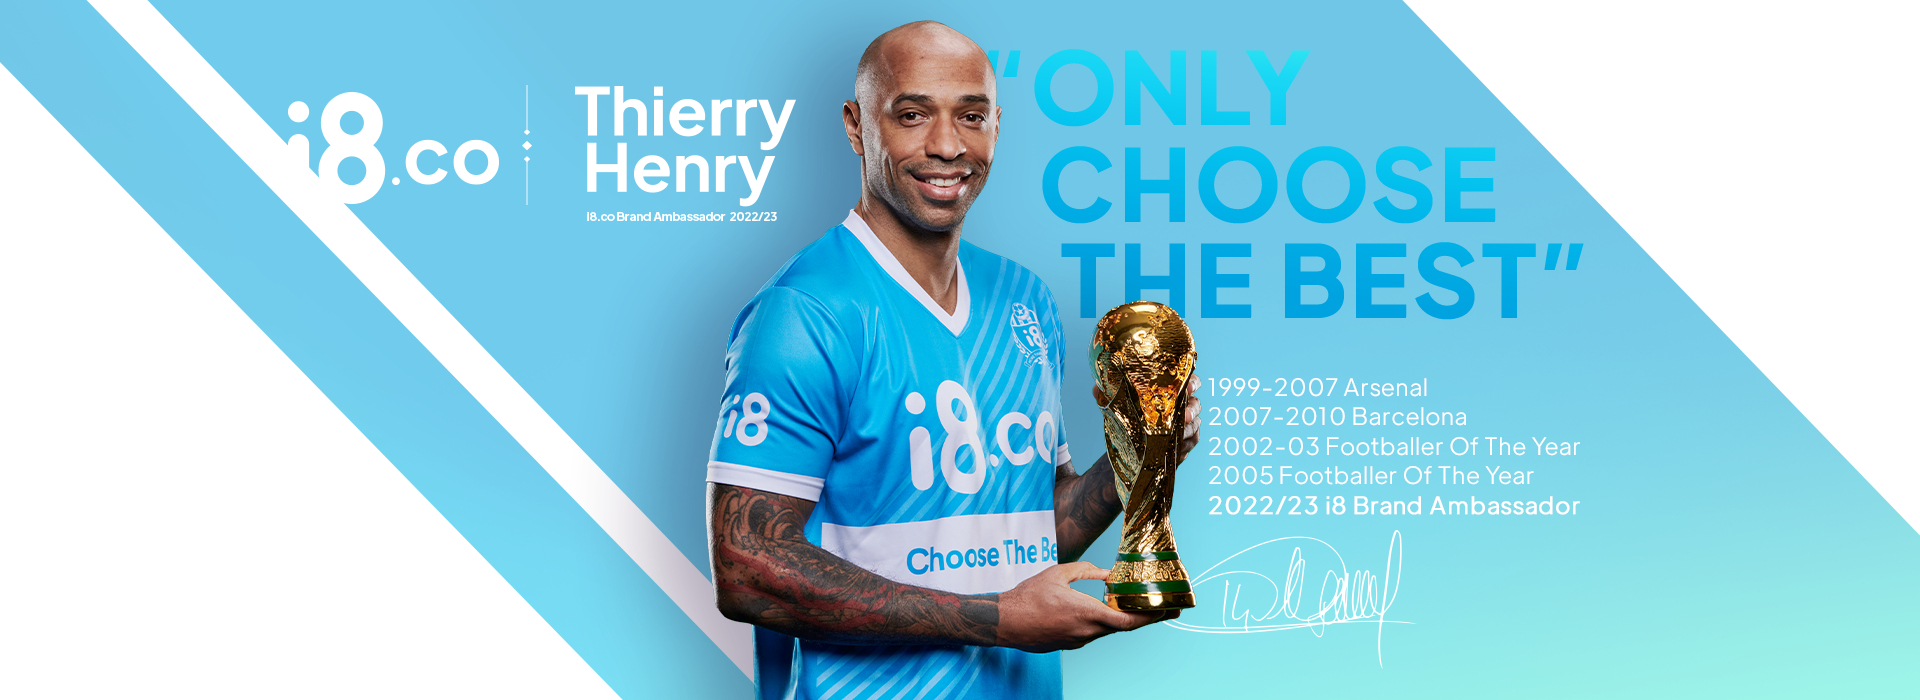 carbanner-3henry-1920x700